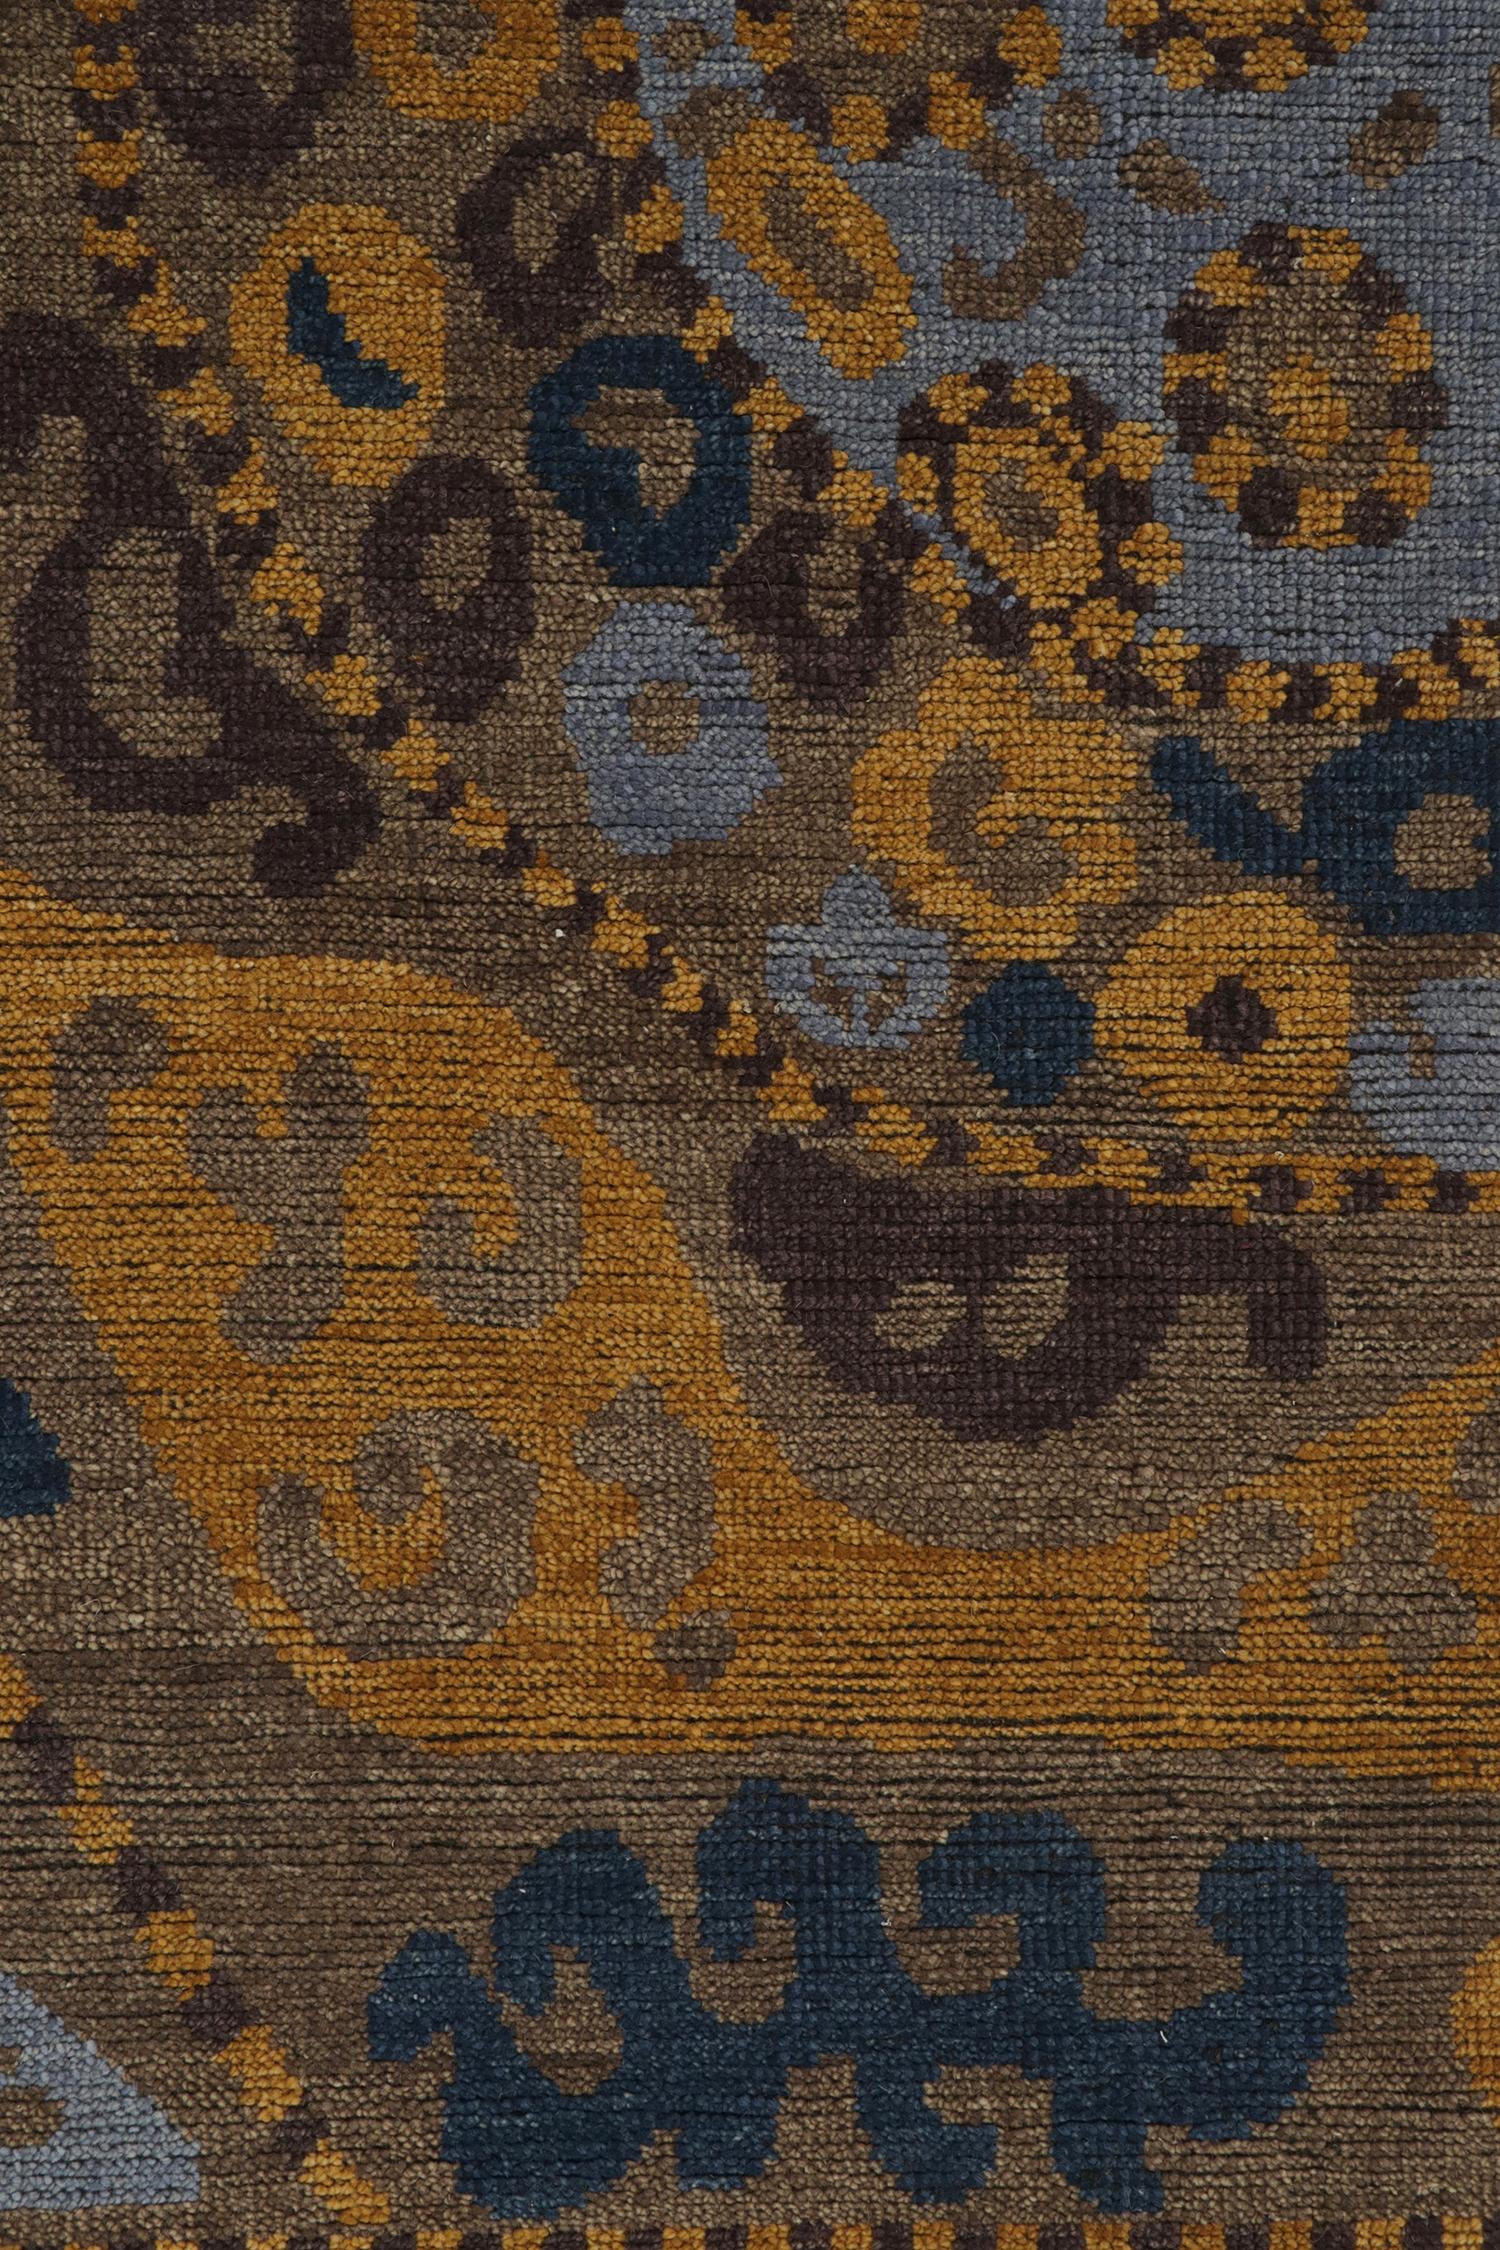 Contemporary Rug & Kilim’s Tribal Inspired Rug in Blue, Brown, Gold Geometric Patterns For Sale